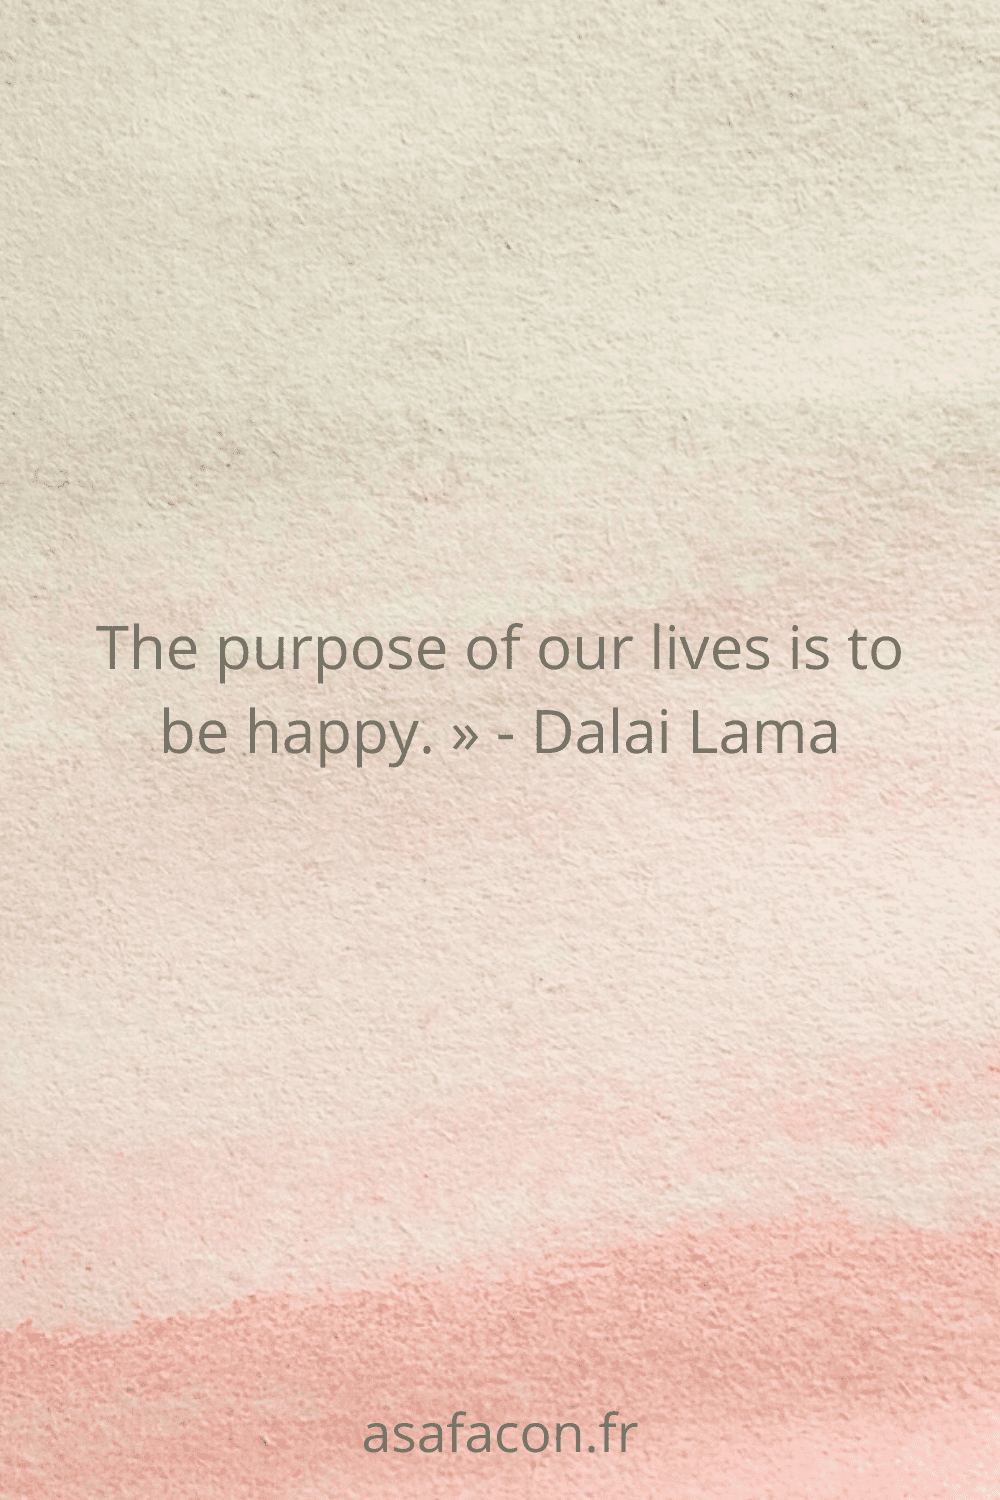 « The purpose of our lives is to be happy. » - Dalai Lama